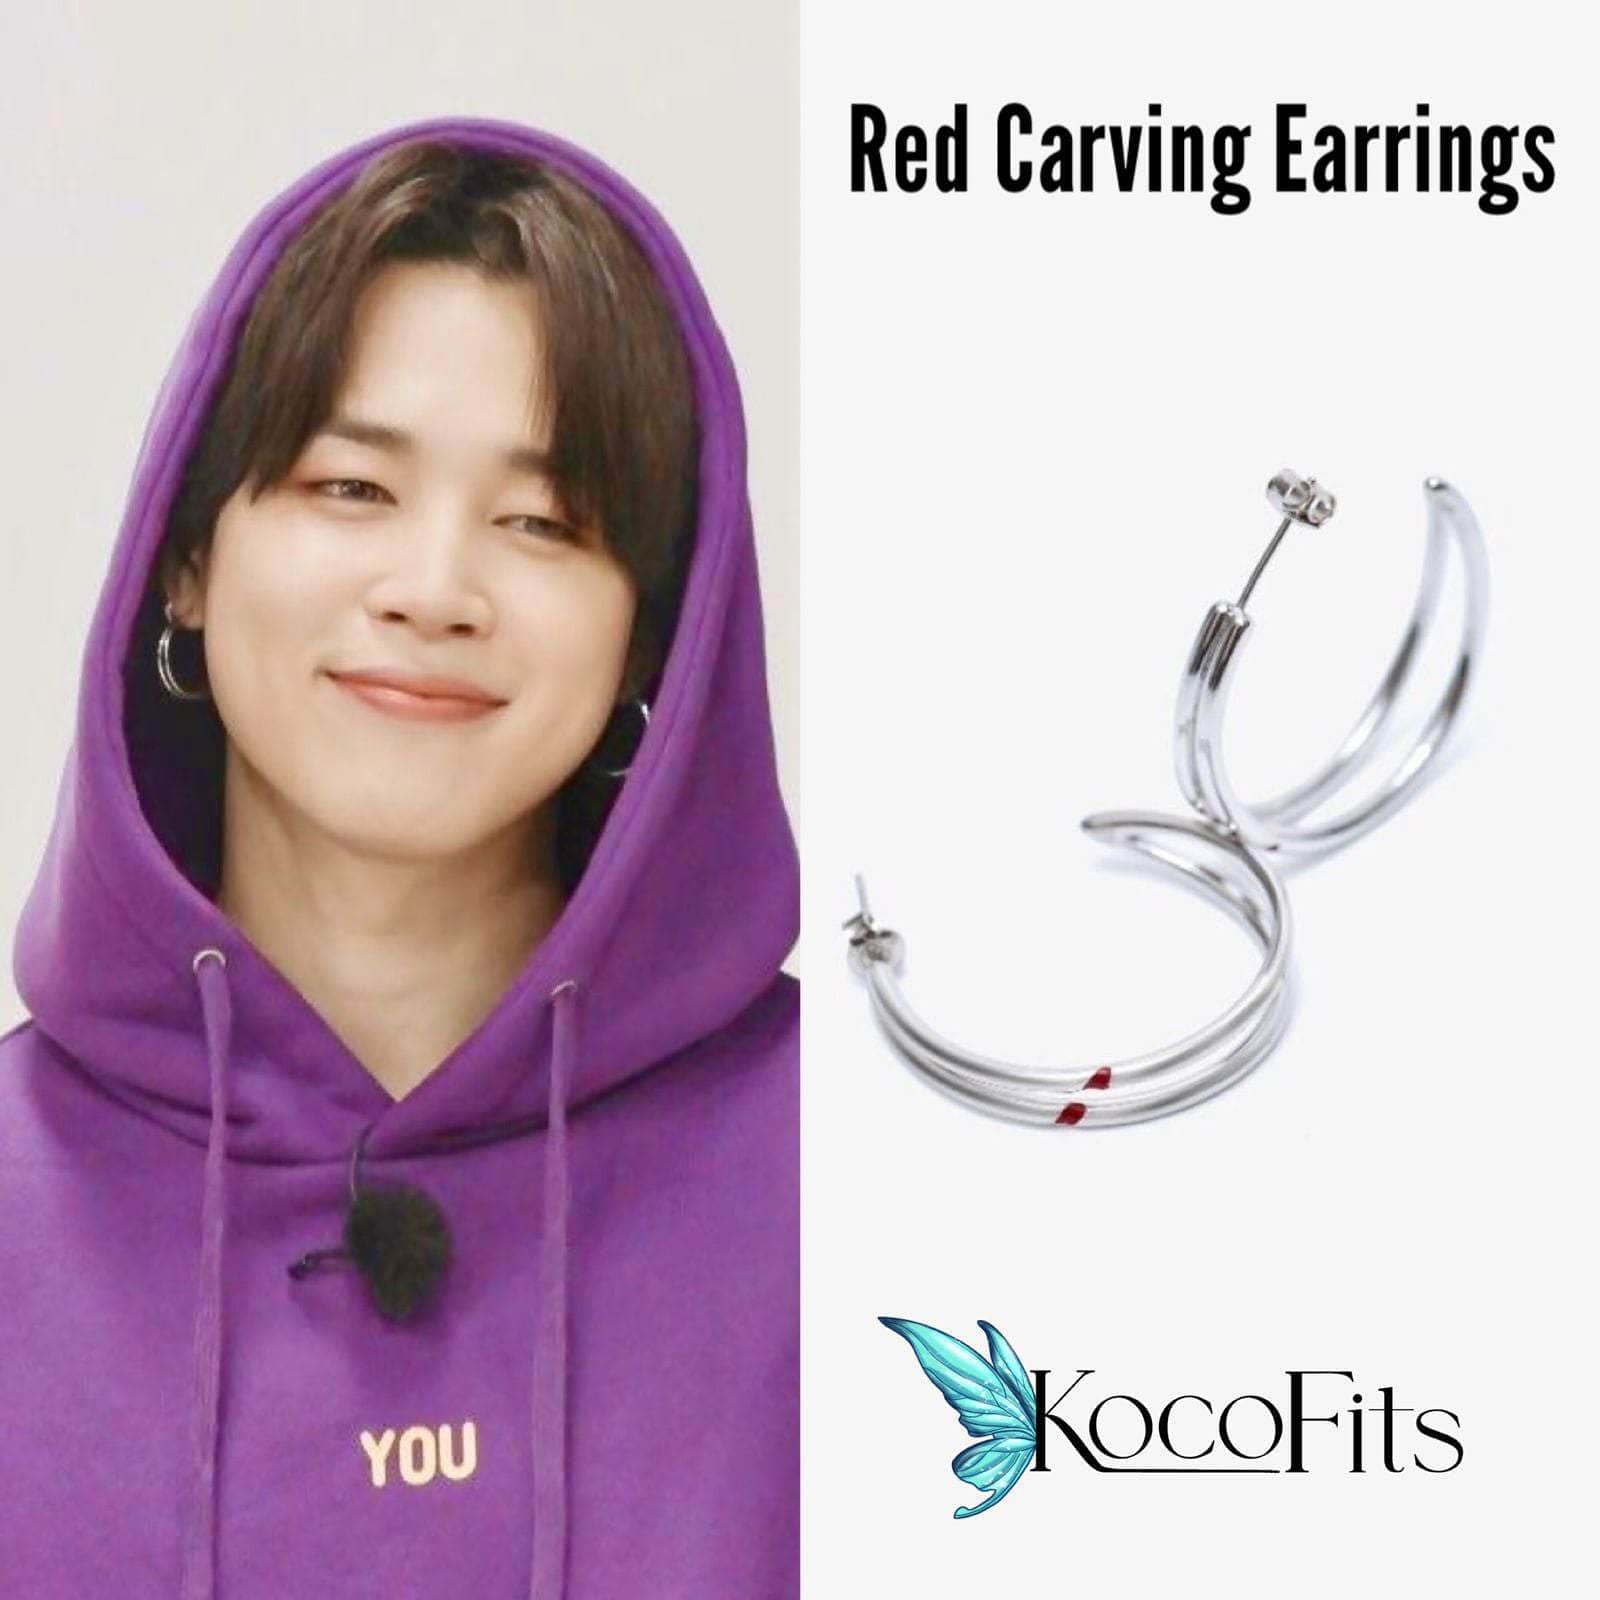 BTS JIMIN RED CARVING EARRING ジミン ピアス